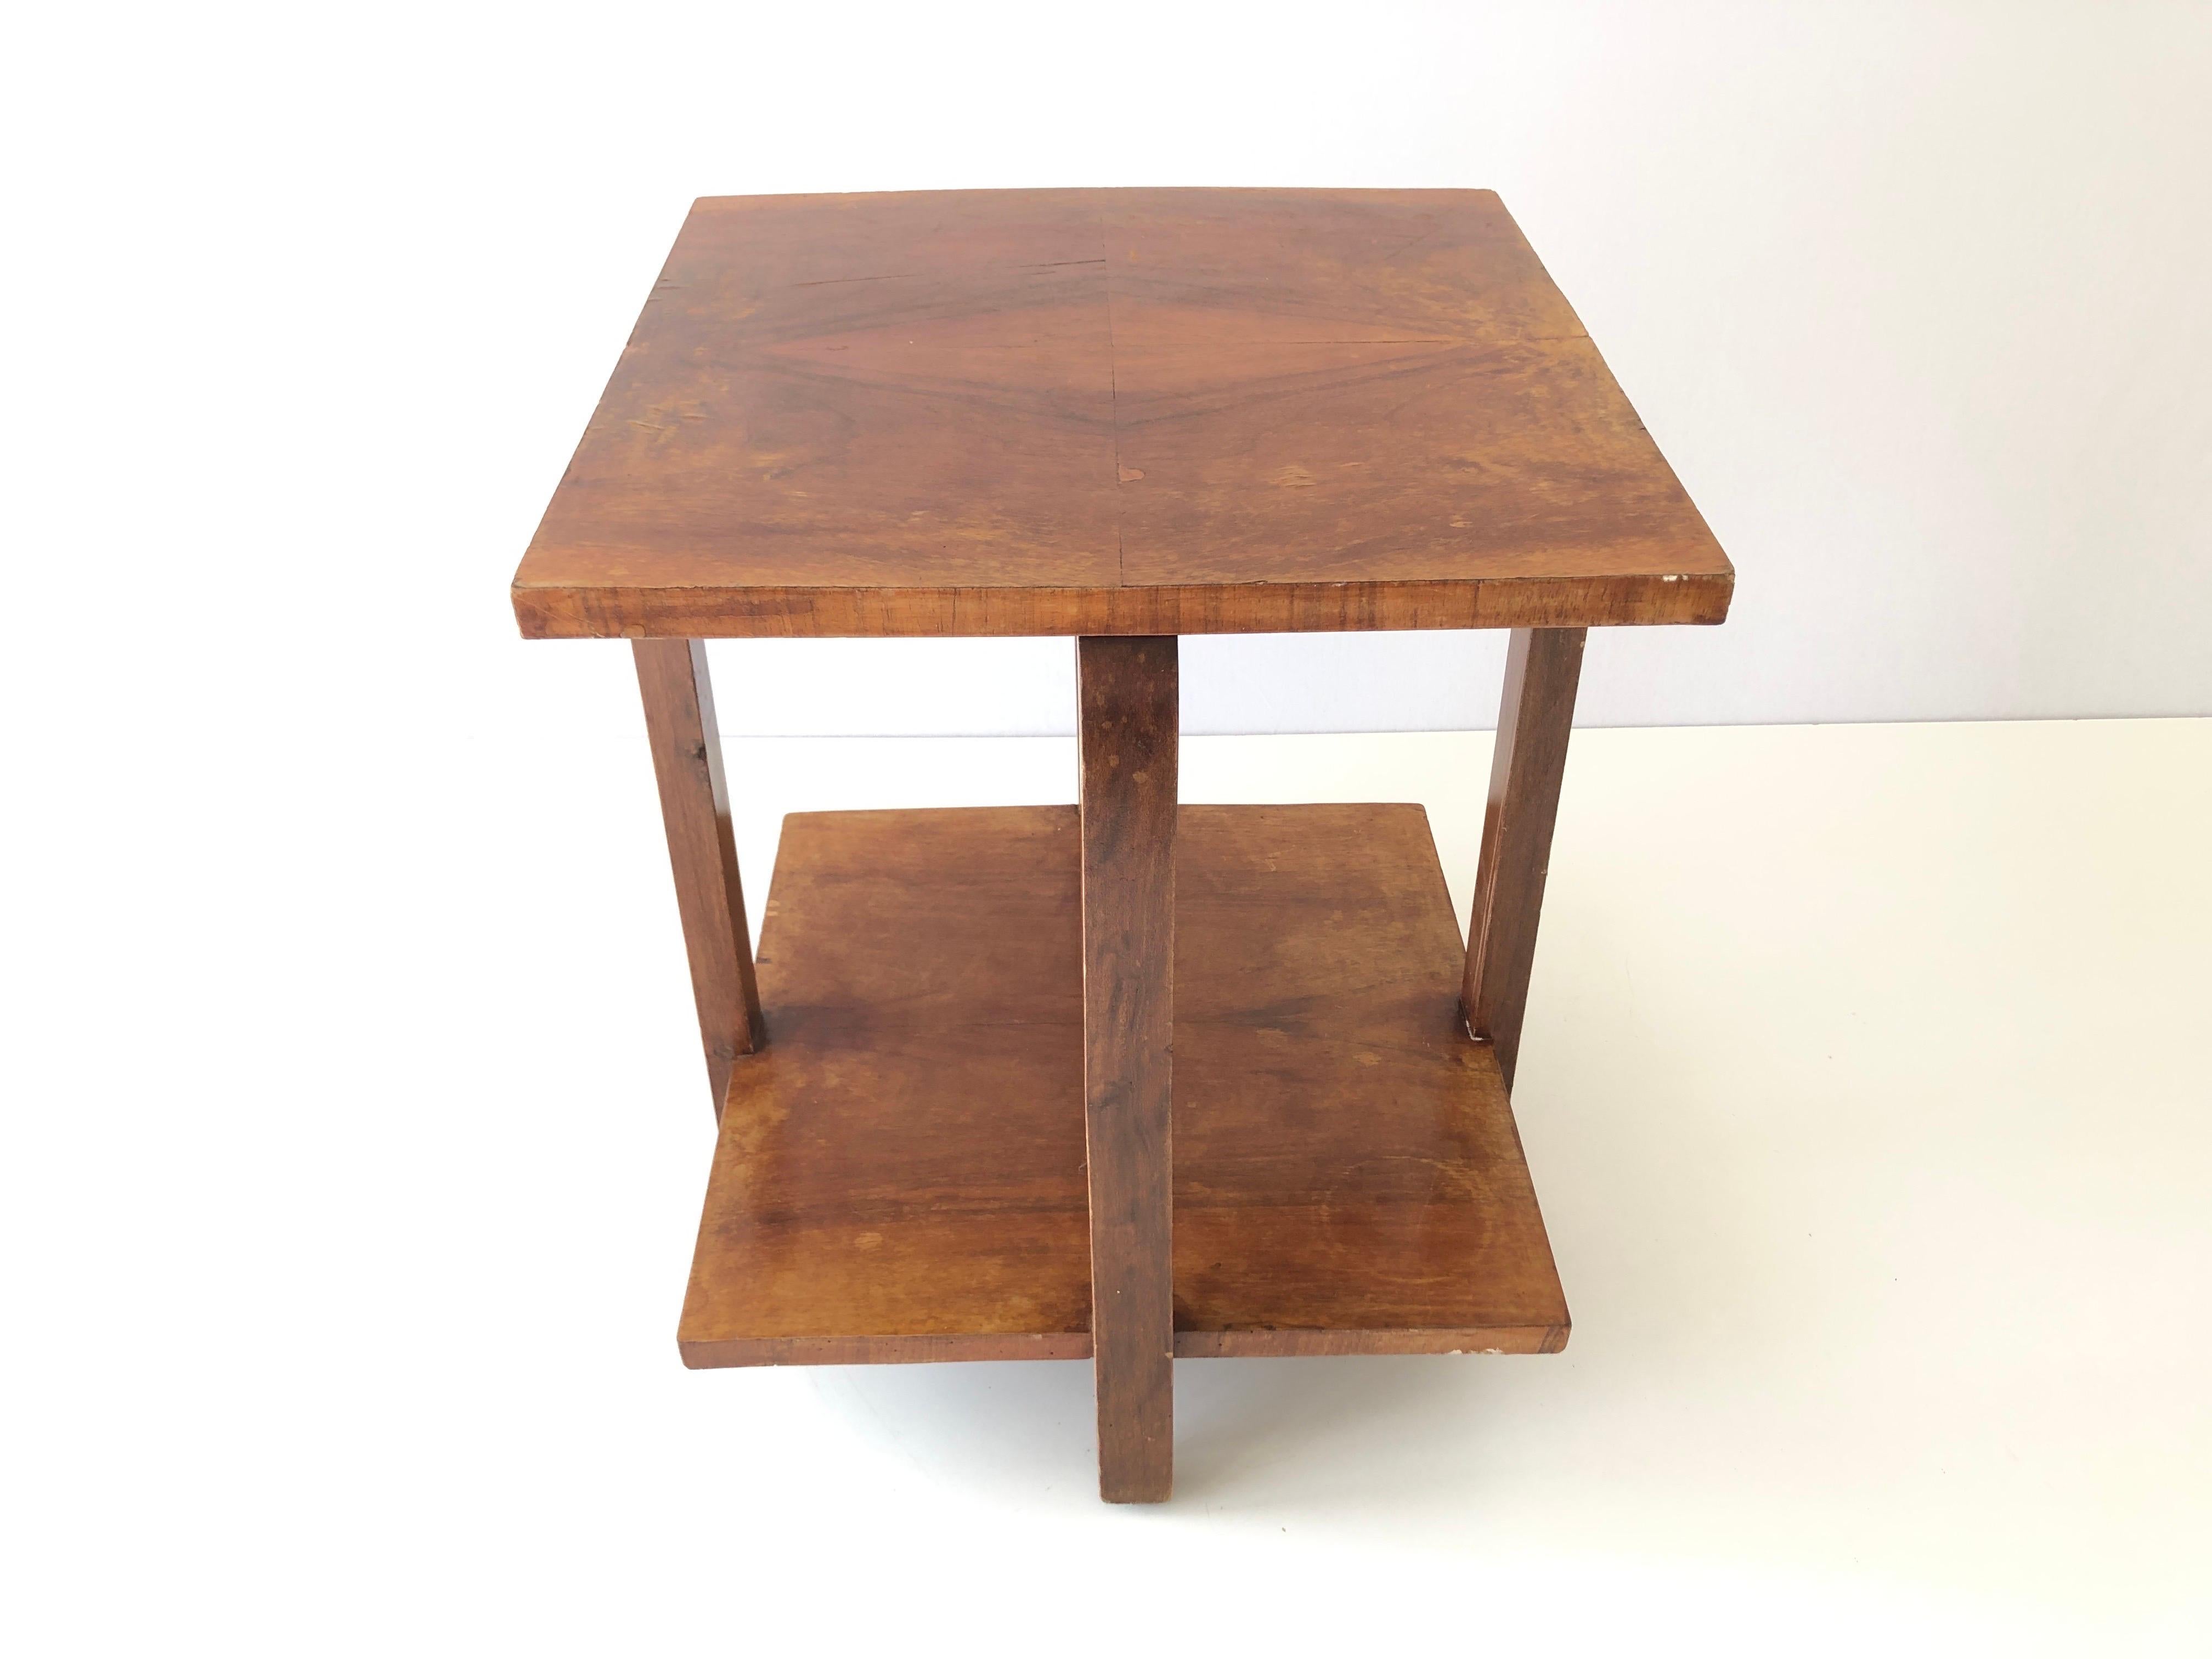 Mid-20th Century Art Deco Square Wood Corner or End Table, 1940s, Made in Italy For Sale